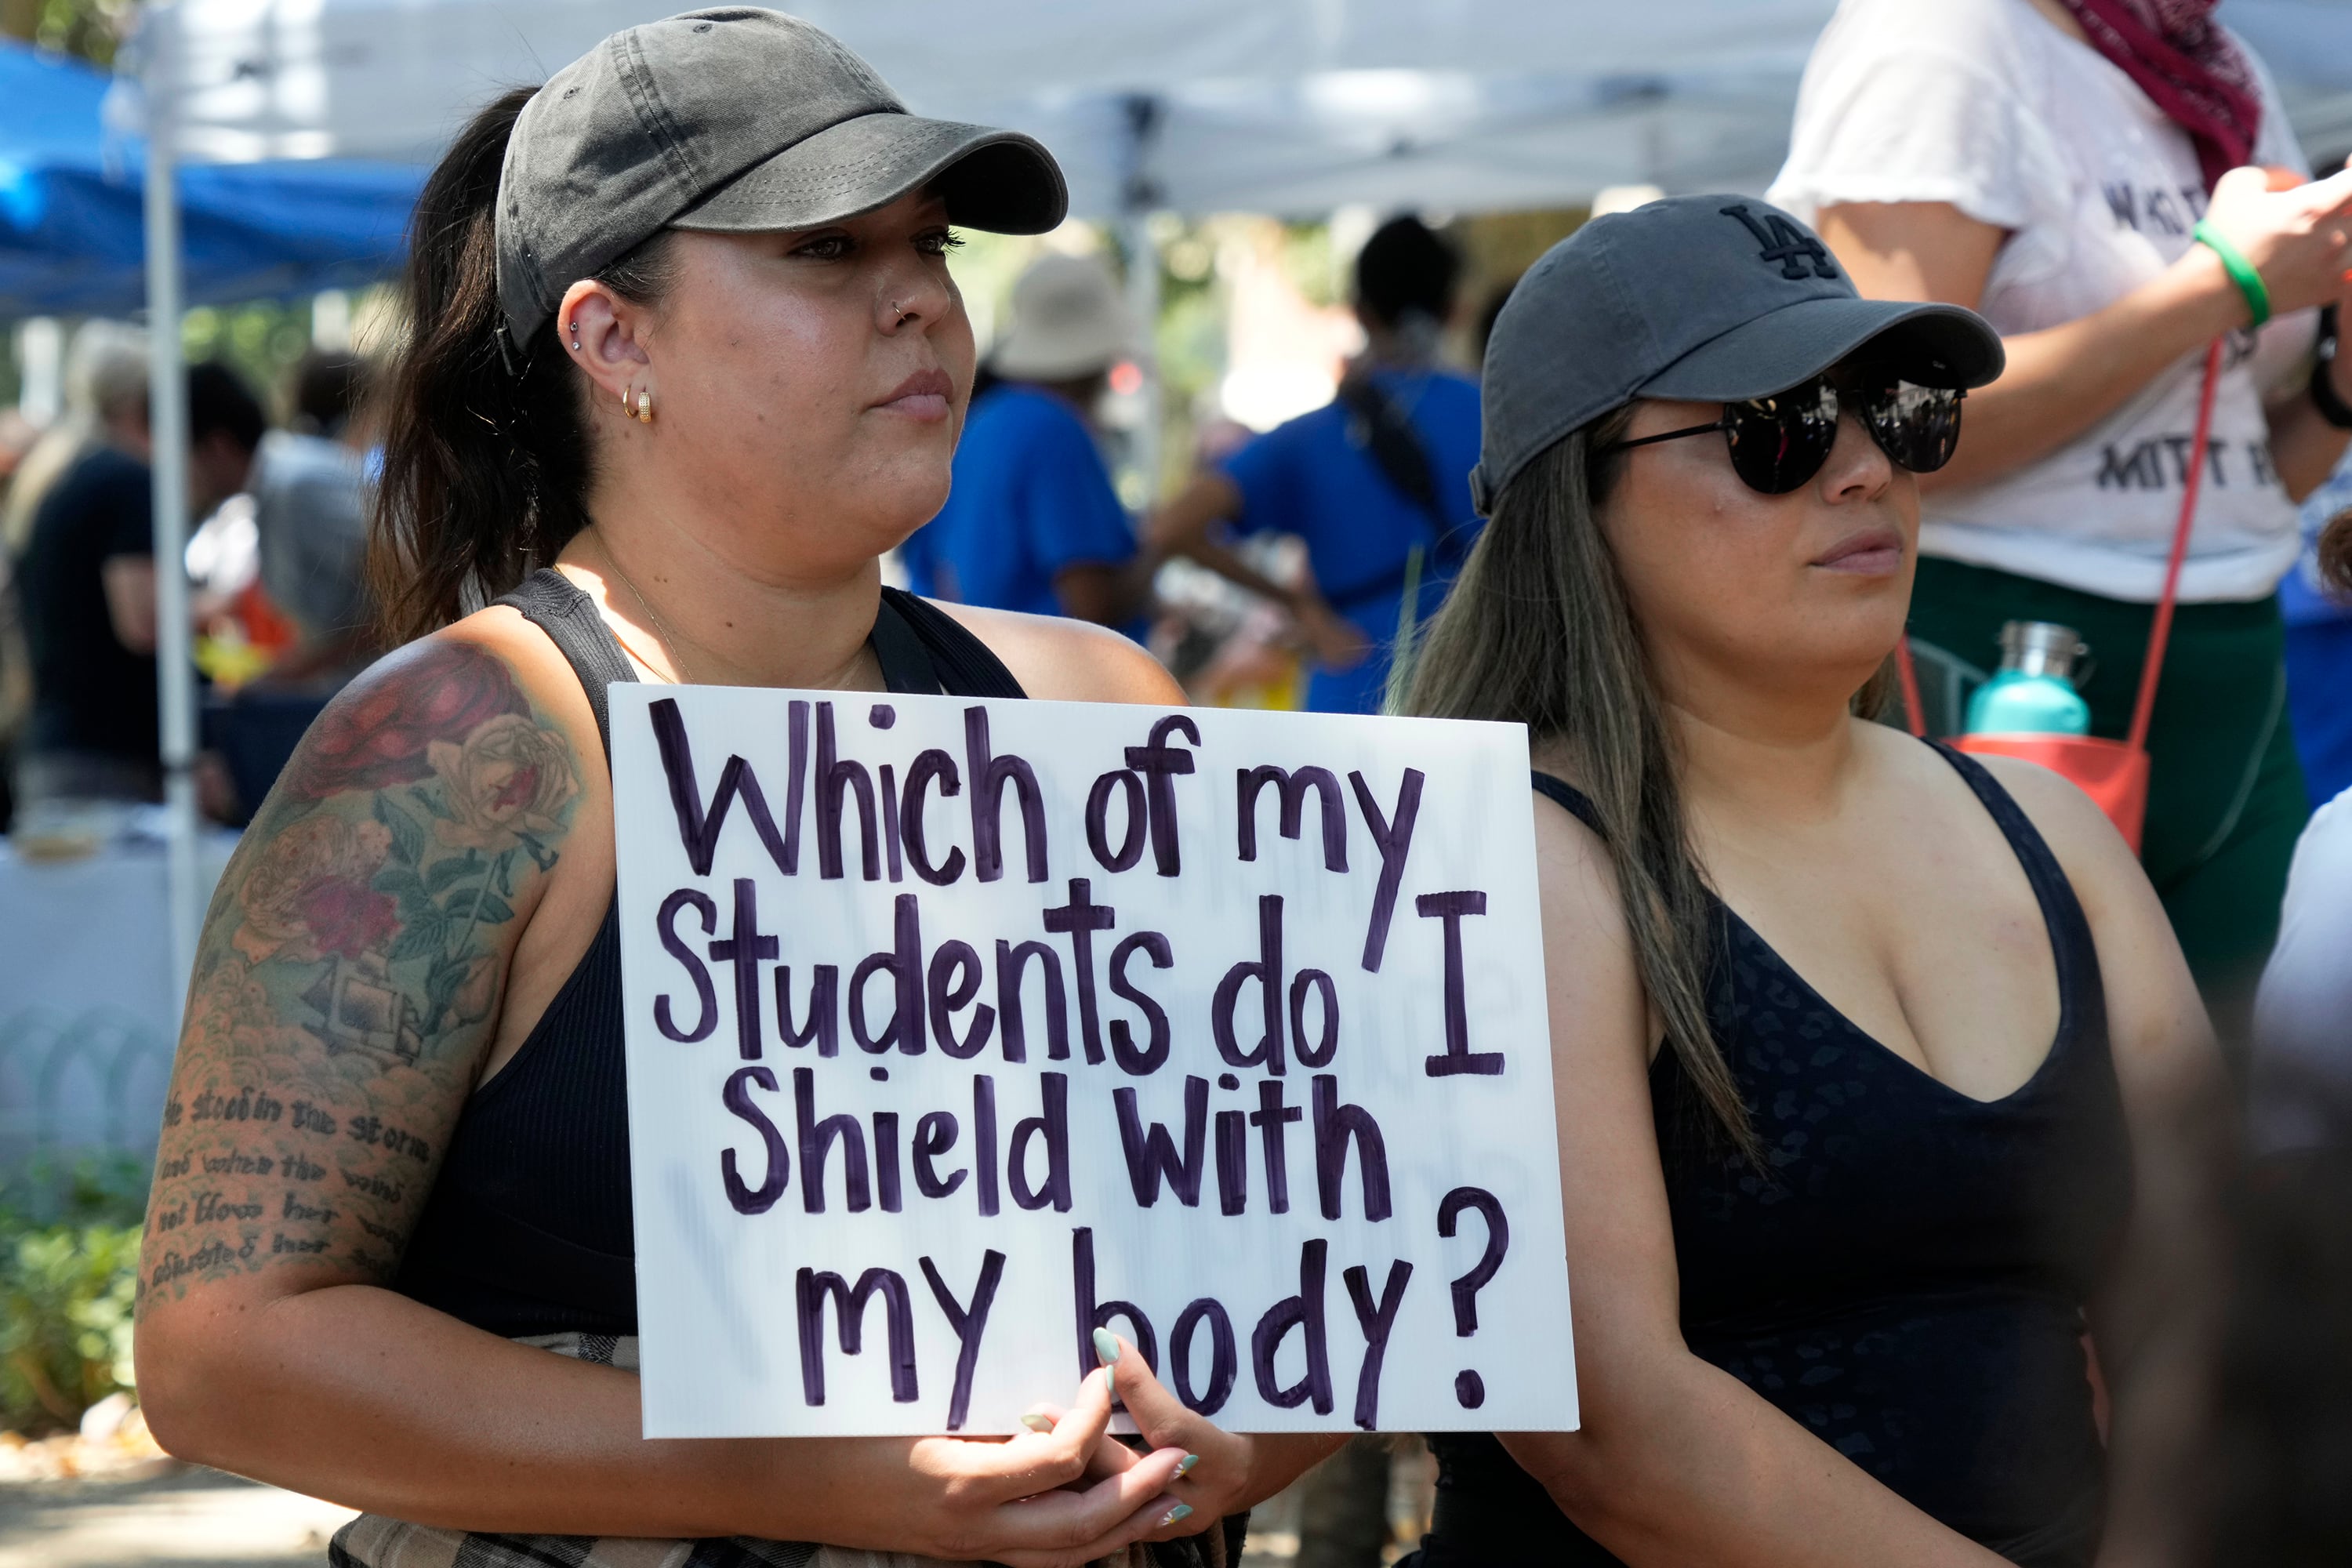 Two woman wearing baseball hats stand next to each other outside and one is holding a white sign with black words that read "Which of my students do I shield with my body?"